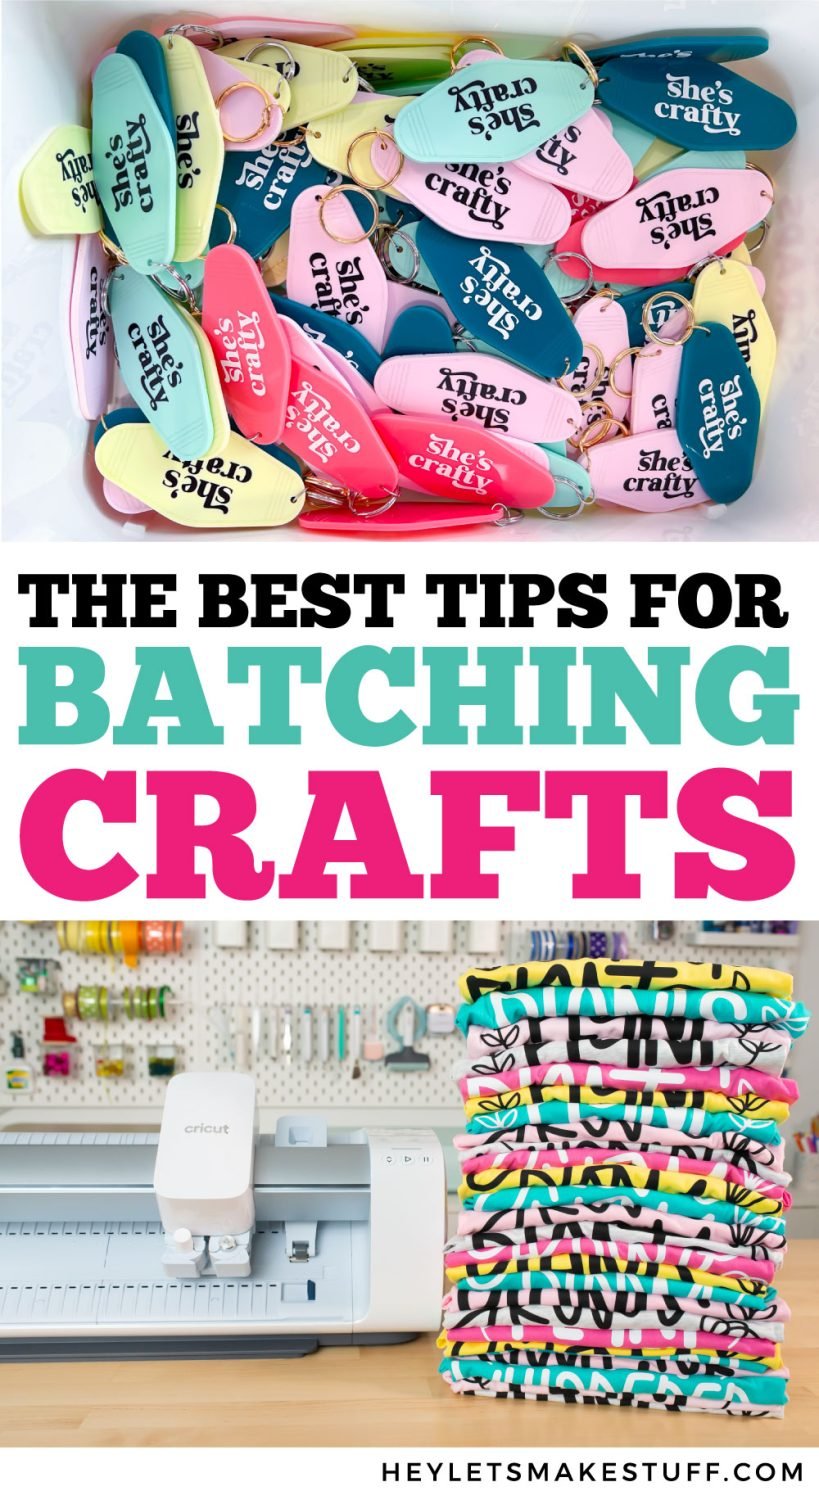 The Best Tips for Batching Crafts pin image